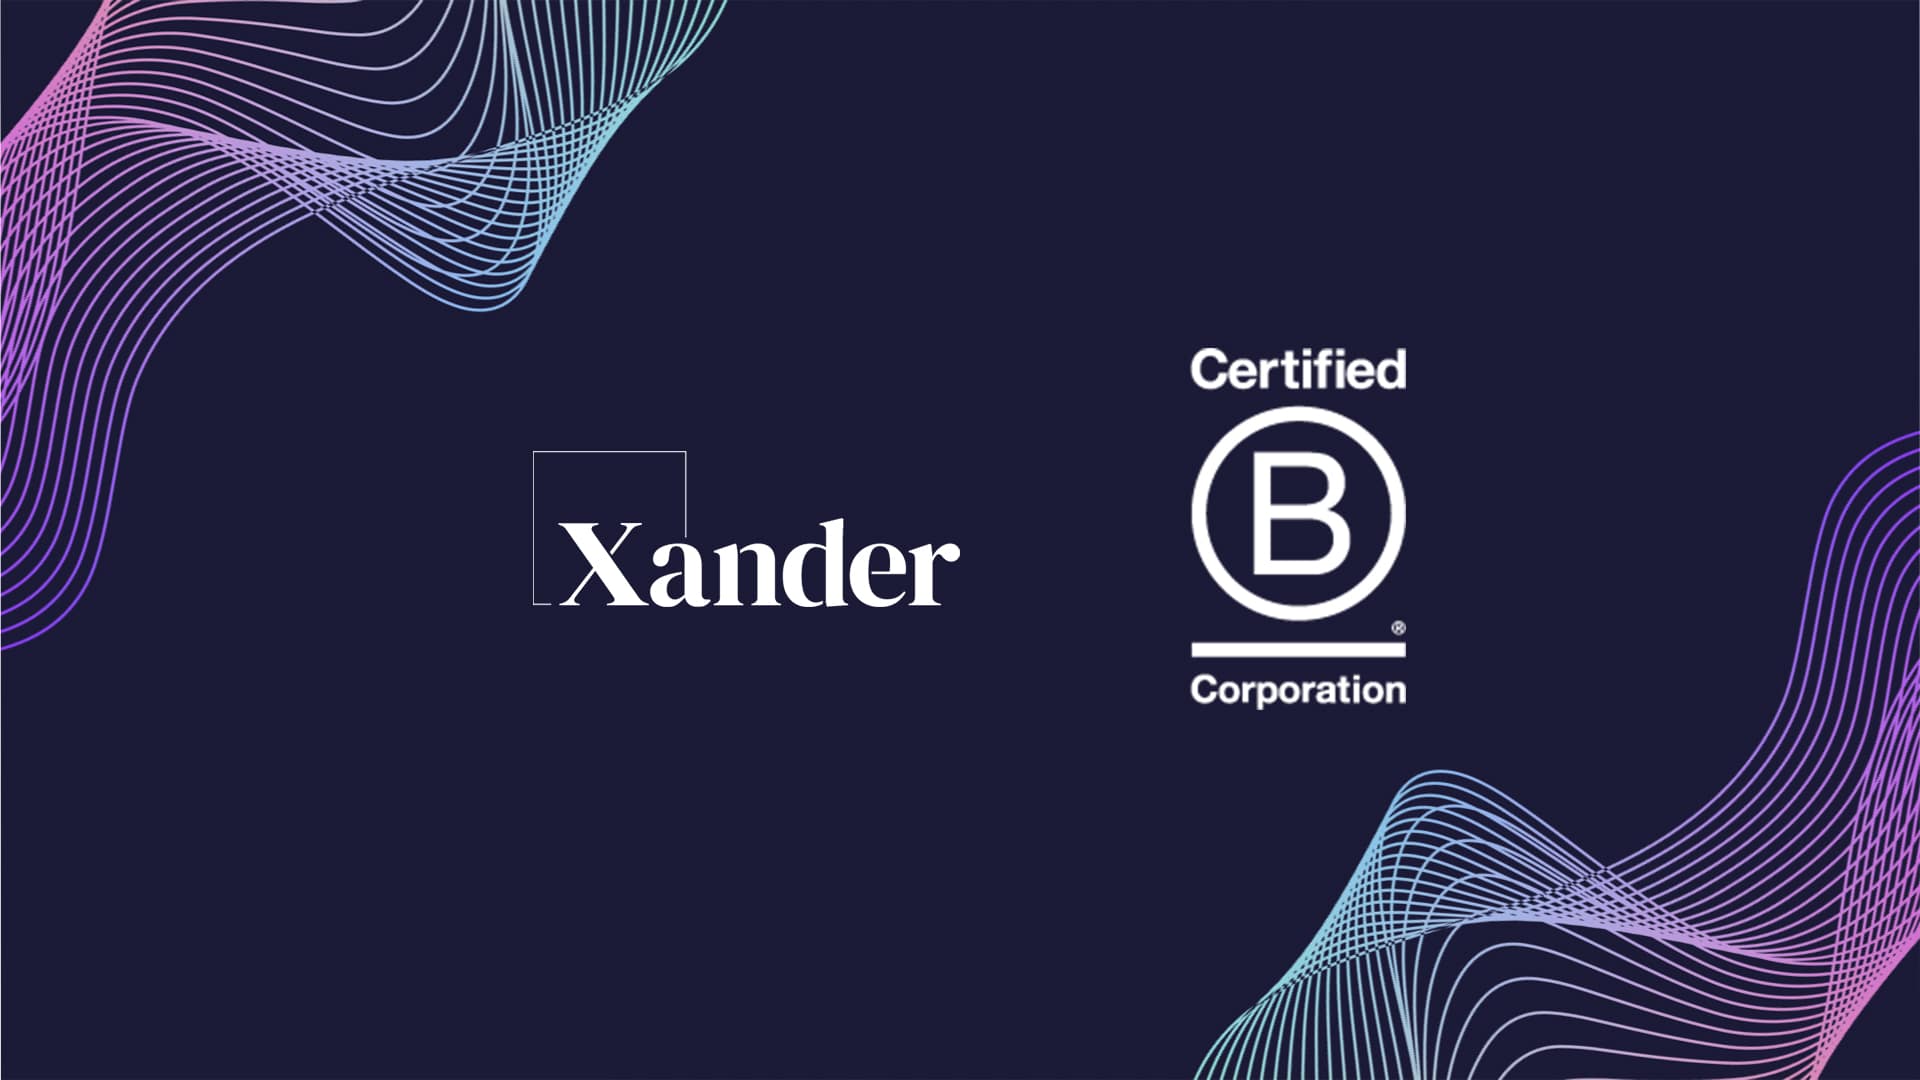 Continuing to drive social change: Xander becomes a Certified B Corporation